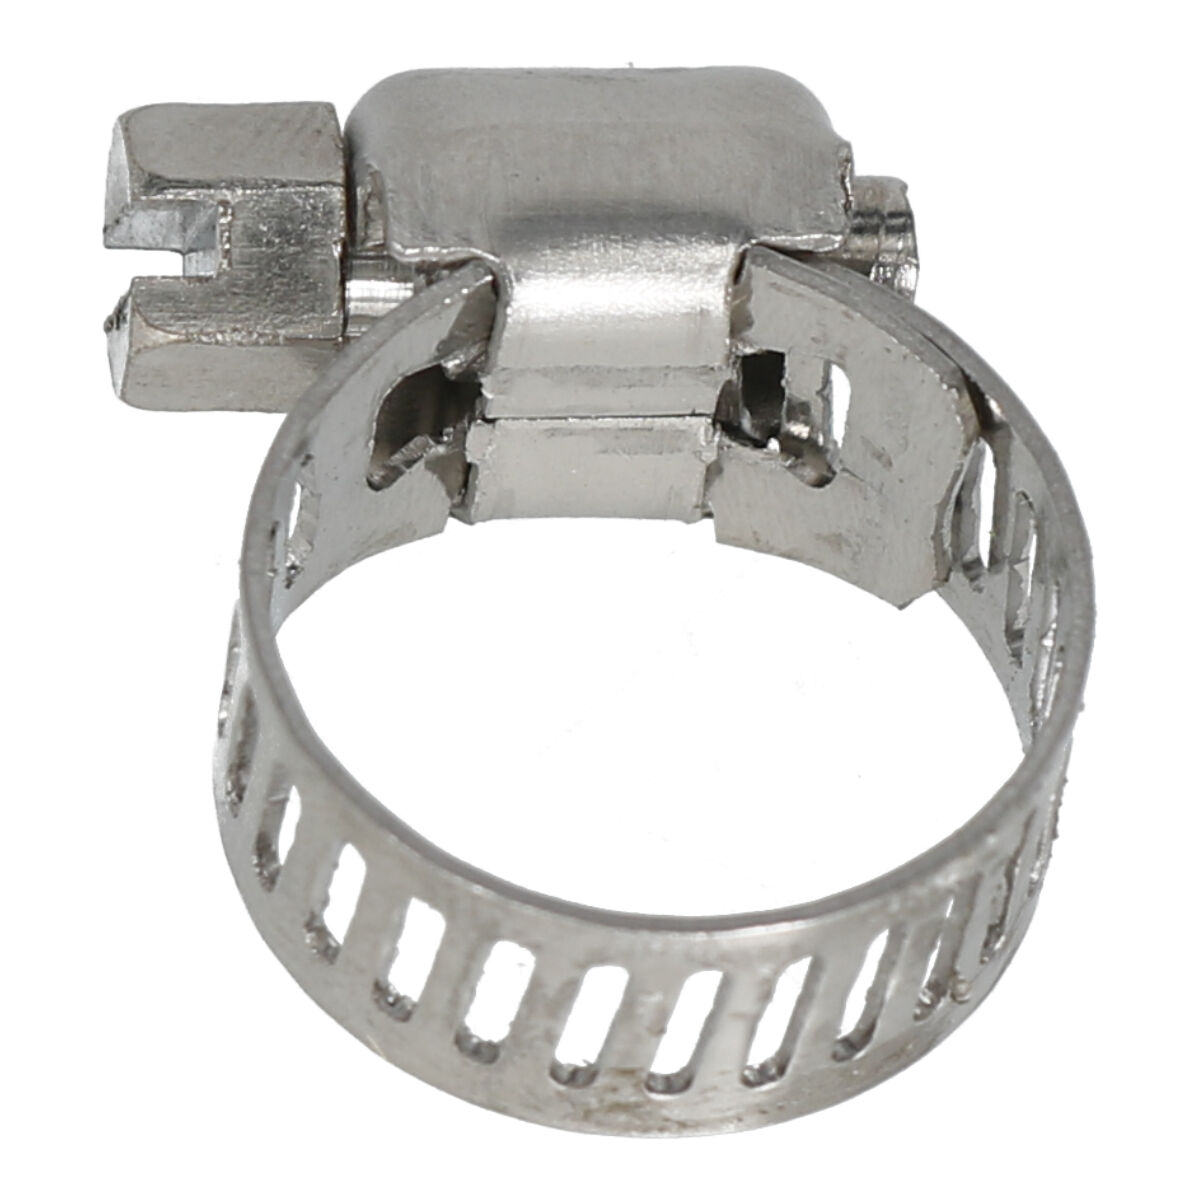 Hose Clamp RVS with wing screw 10-16 mm 